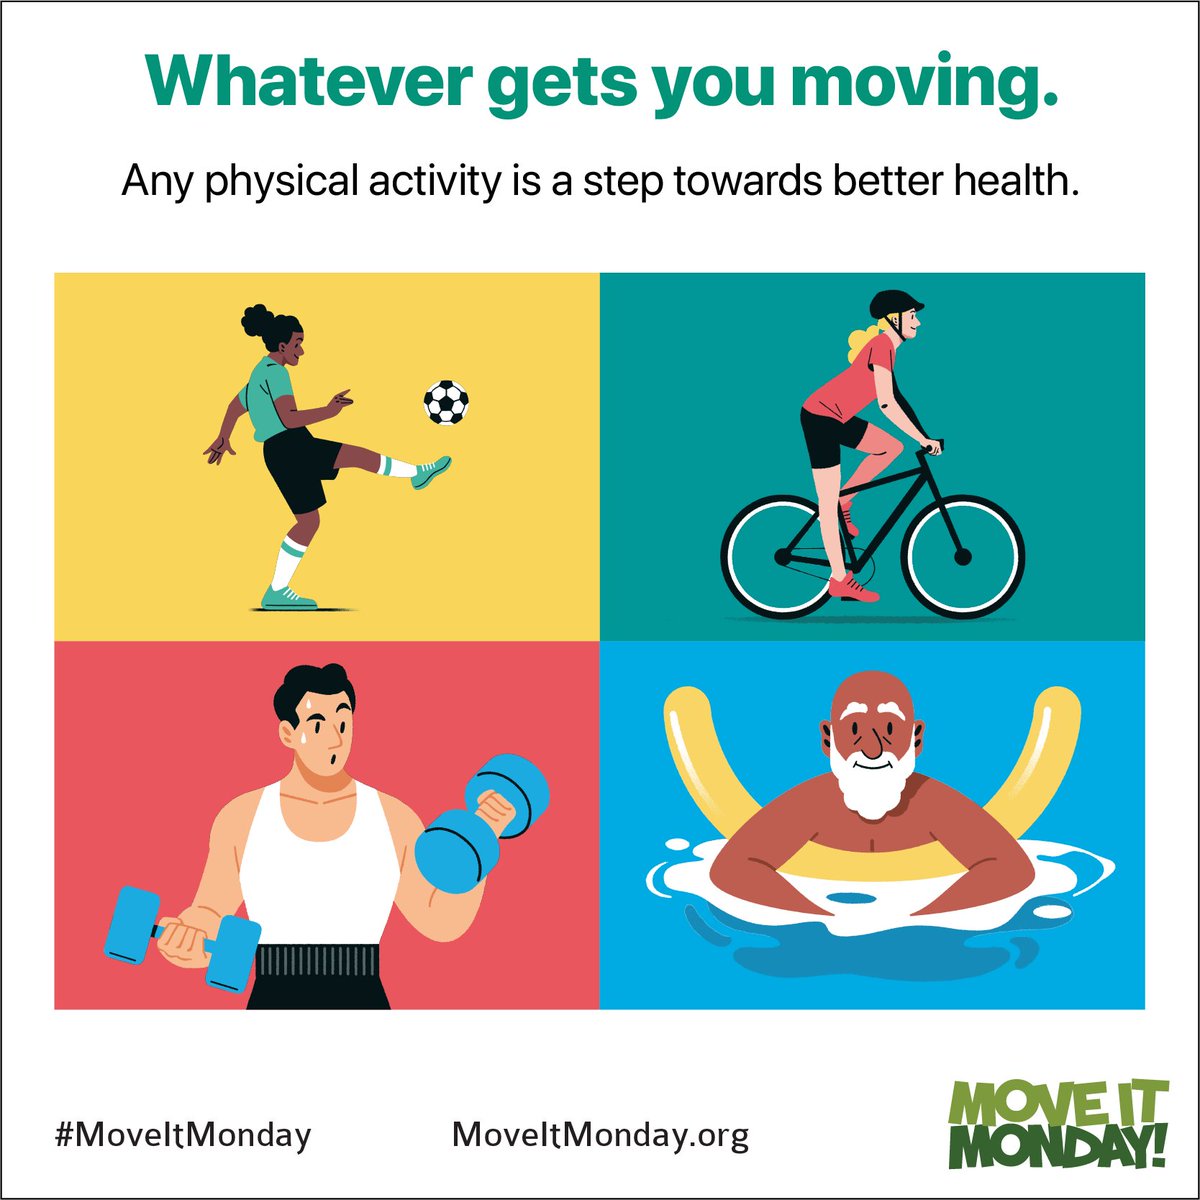 How Much Should I Move? @MoveItMonday Being physically activity is one of the most important actions a person can take to improve their health. But what is “physical activity” and how much does one need to start experiencing the benefits? tx.ag/h9WiVqn